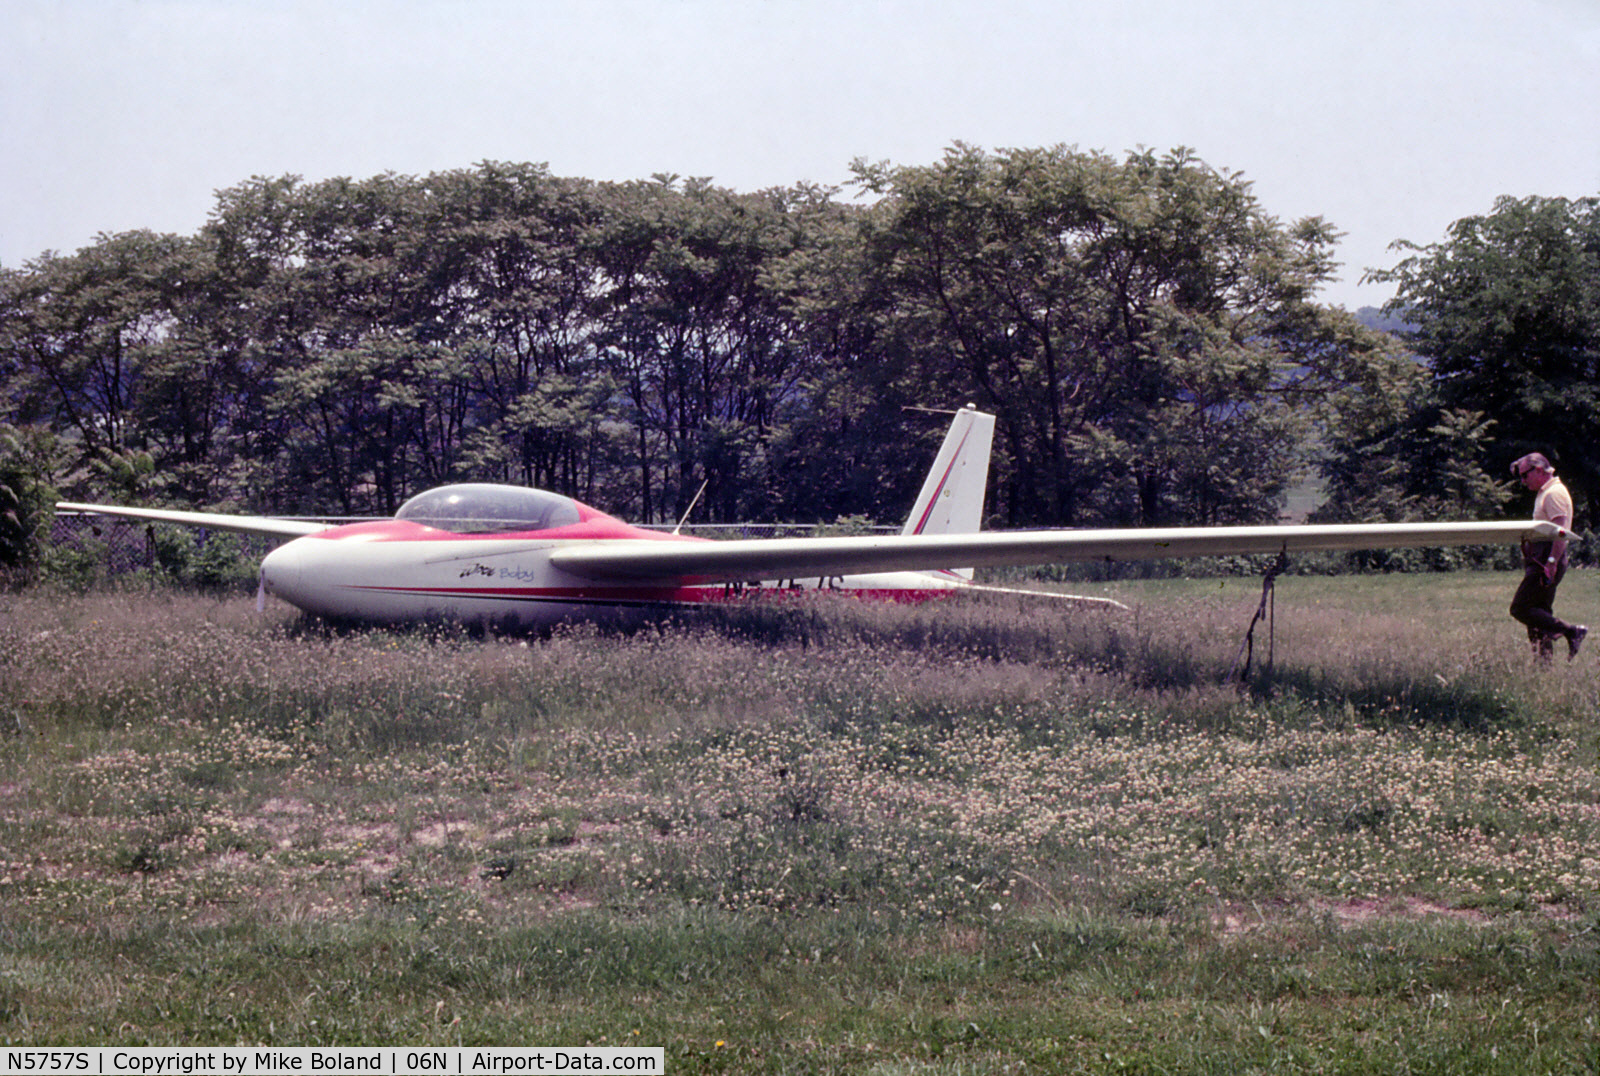 N5757S, 1968 Schweizer SGS 2-32 C/N 57, 1968 Schweizer SGS 2-32 N5757S CN 57 at Randall Field, Middletown, NY in the summer of 1973